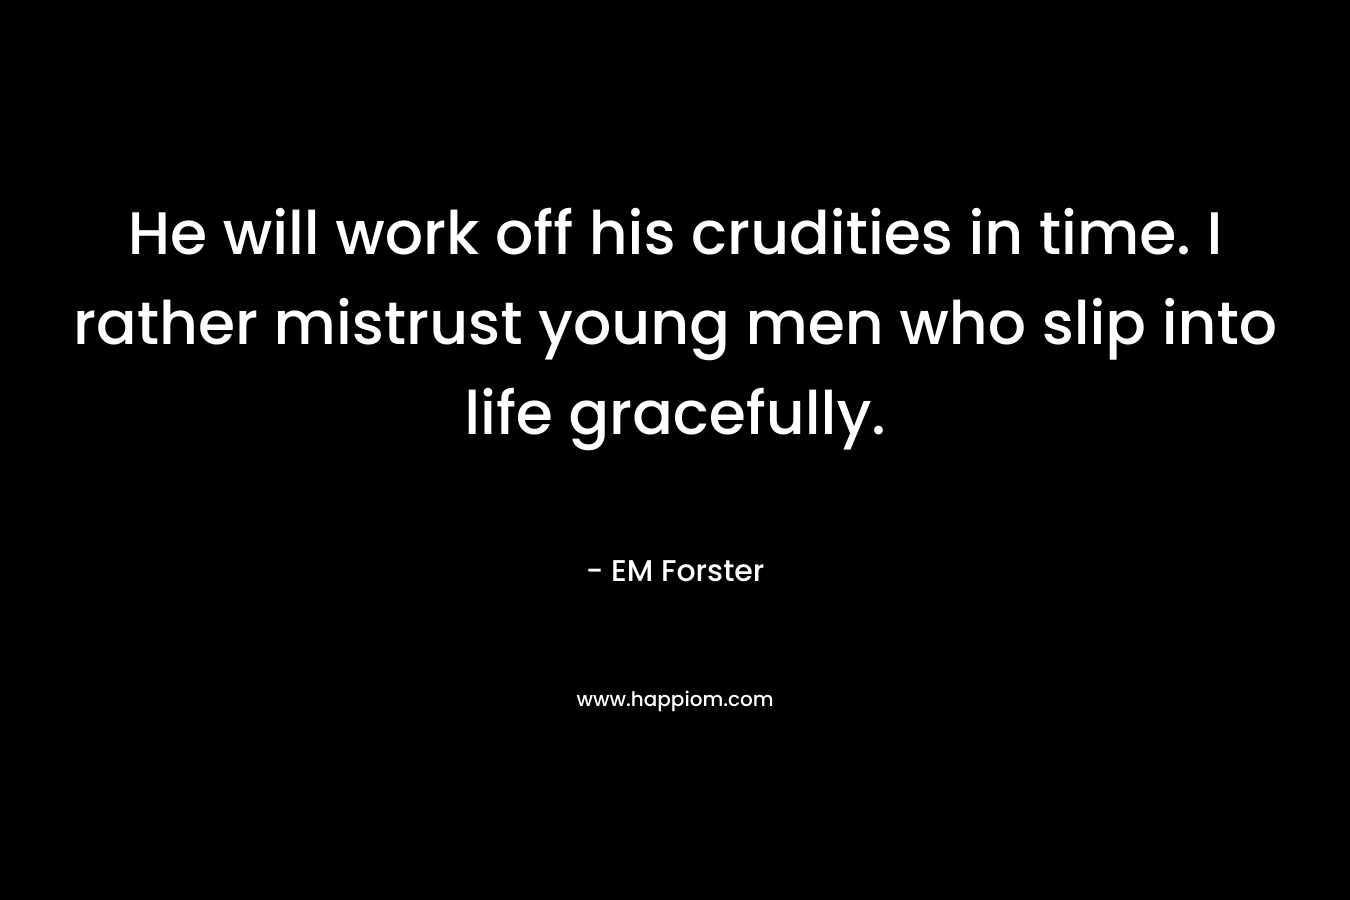 He will work off his crudities in time. I rather mistrust young men who slip into life gracefully.